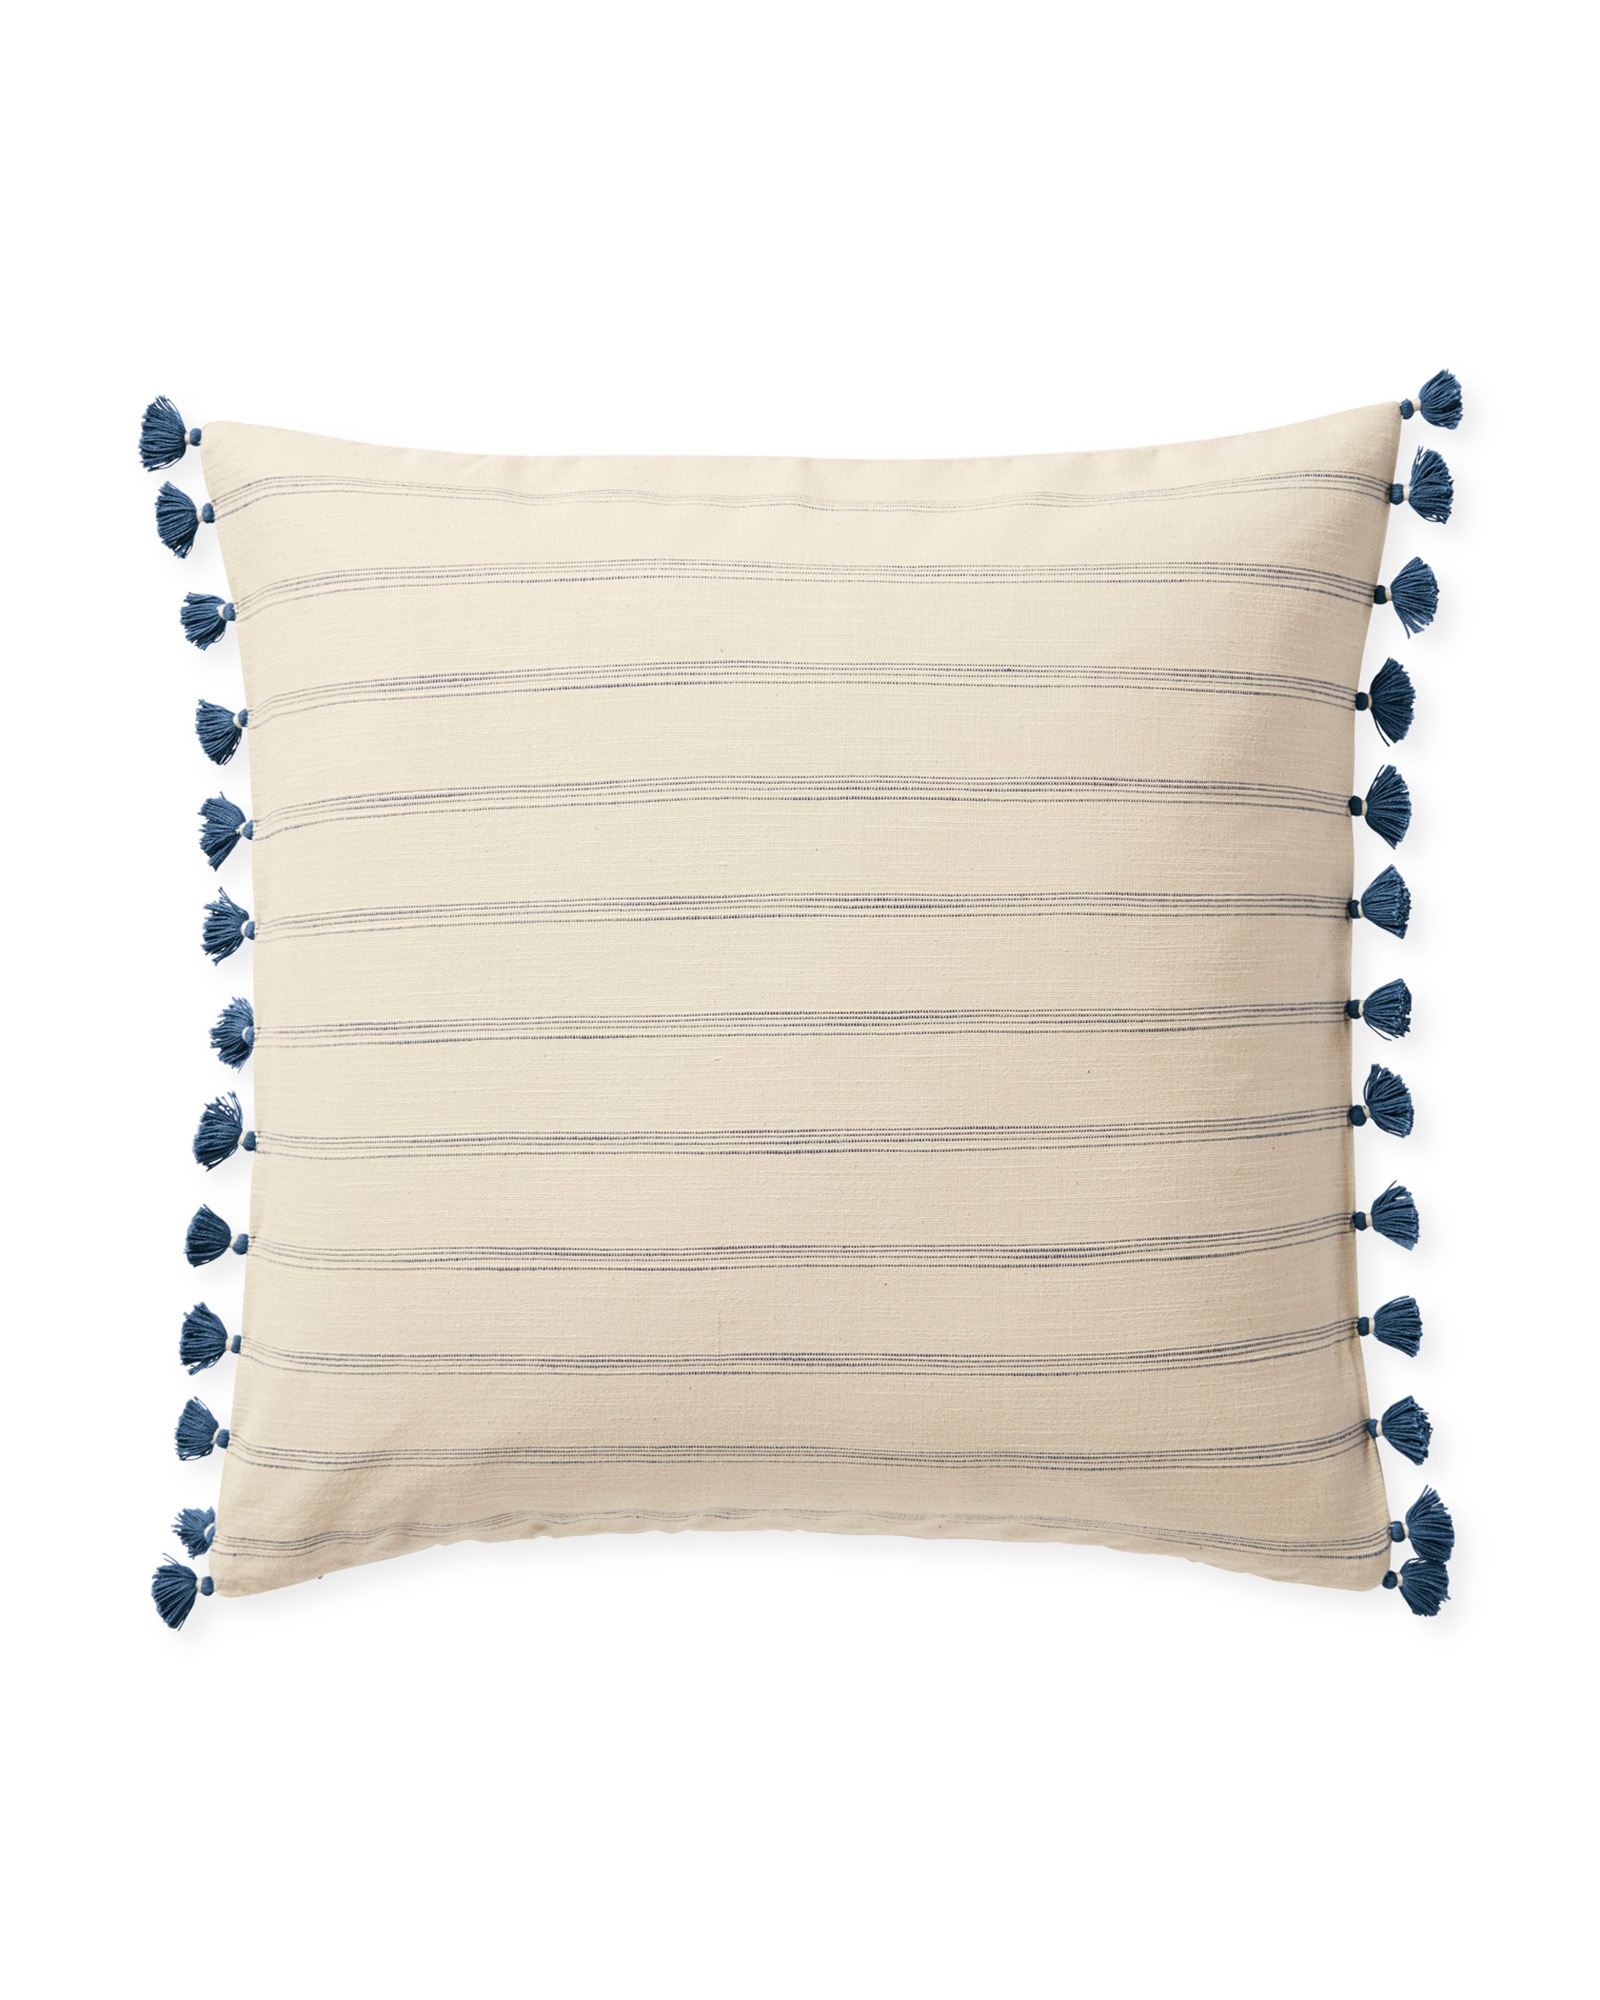 Alsworth 22" SQ Pillow Cover - Washed Indigo - Insert sold separately - Image 0